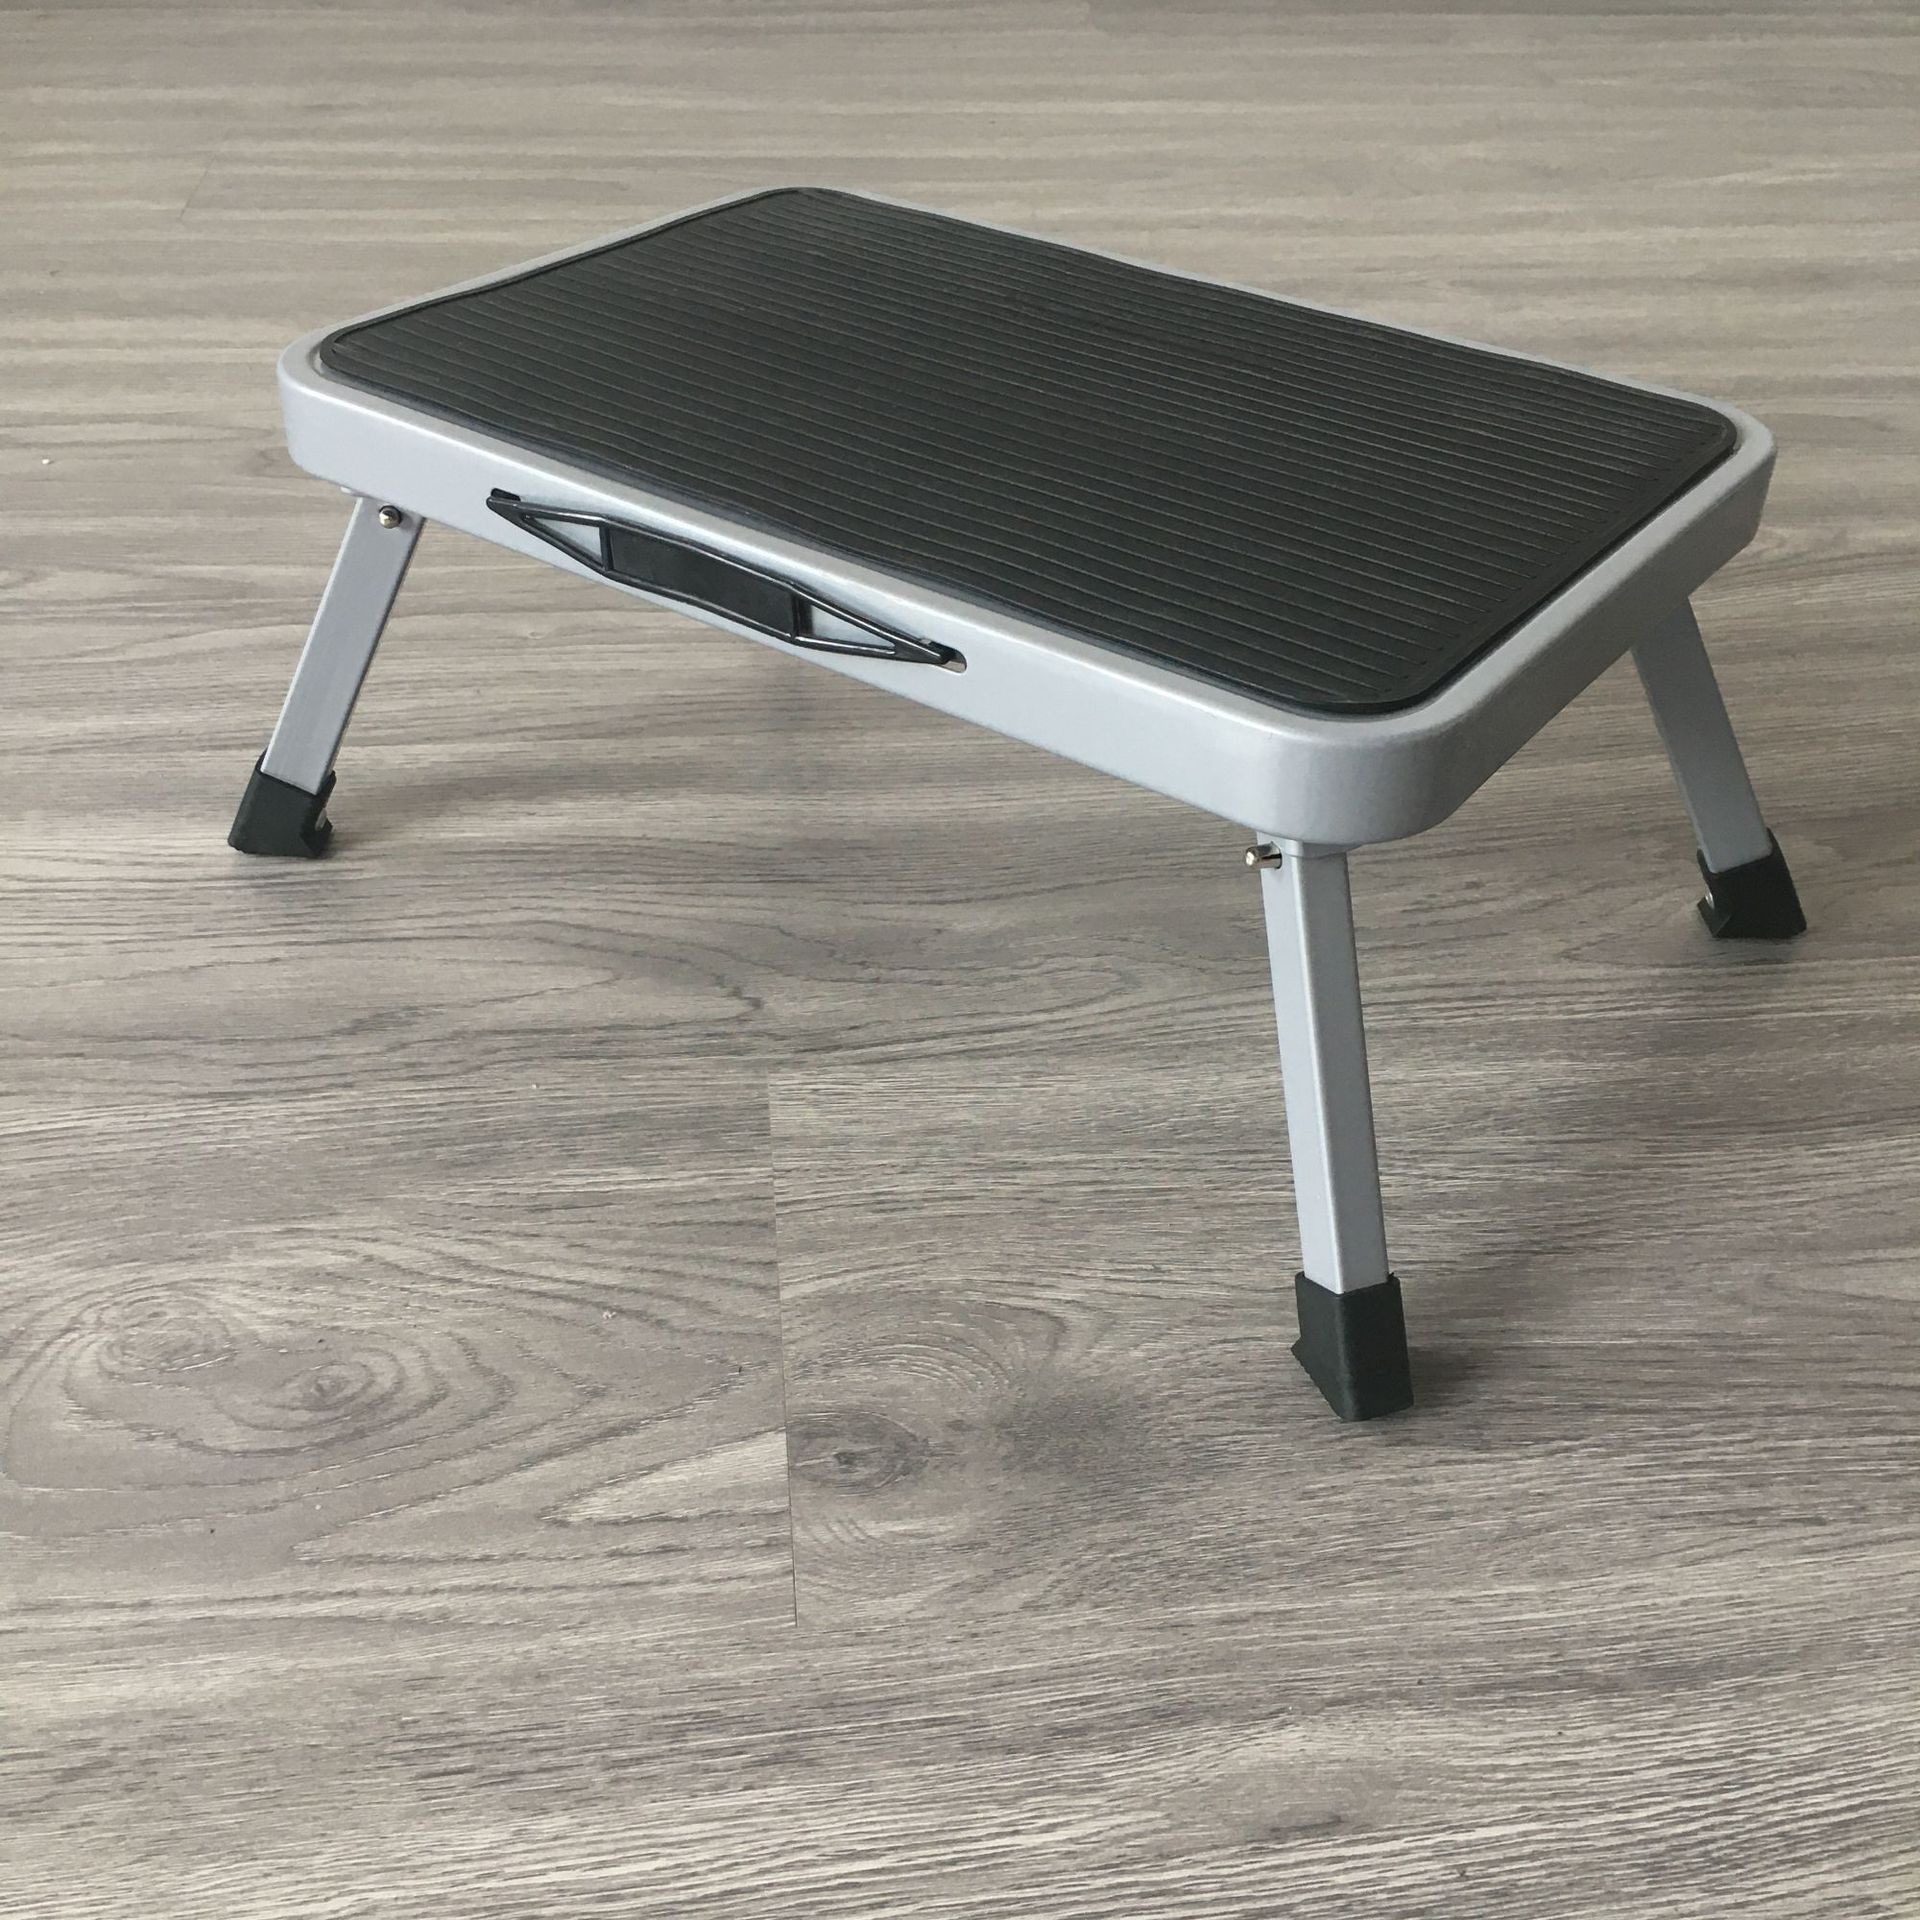 Home portable step stool foldable metal stool step thickened indoor larger step stool (4)